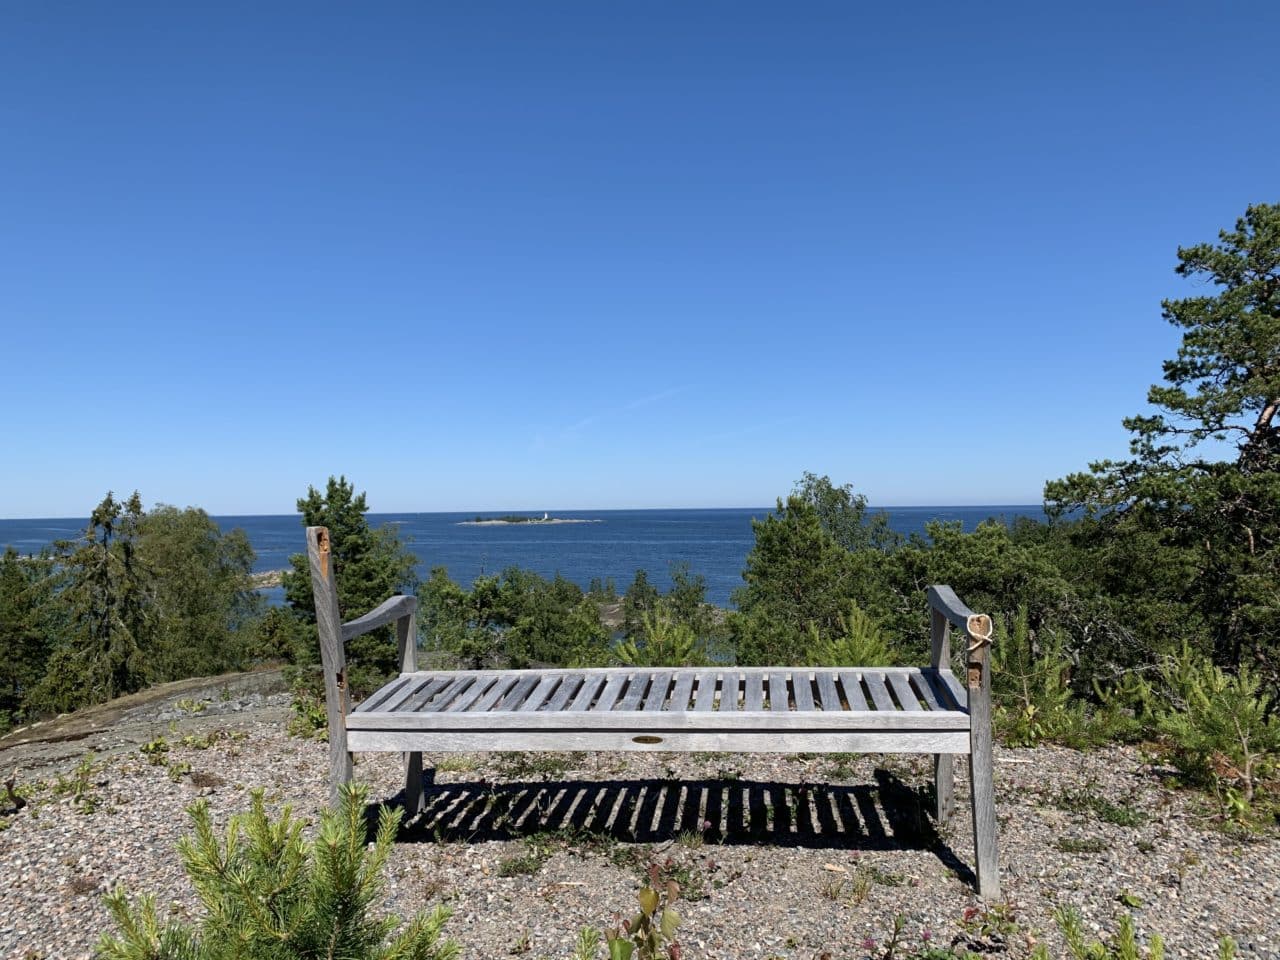 Old Broken Wooden Bench On A Mountain Top With A Ocean View